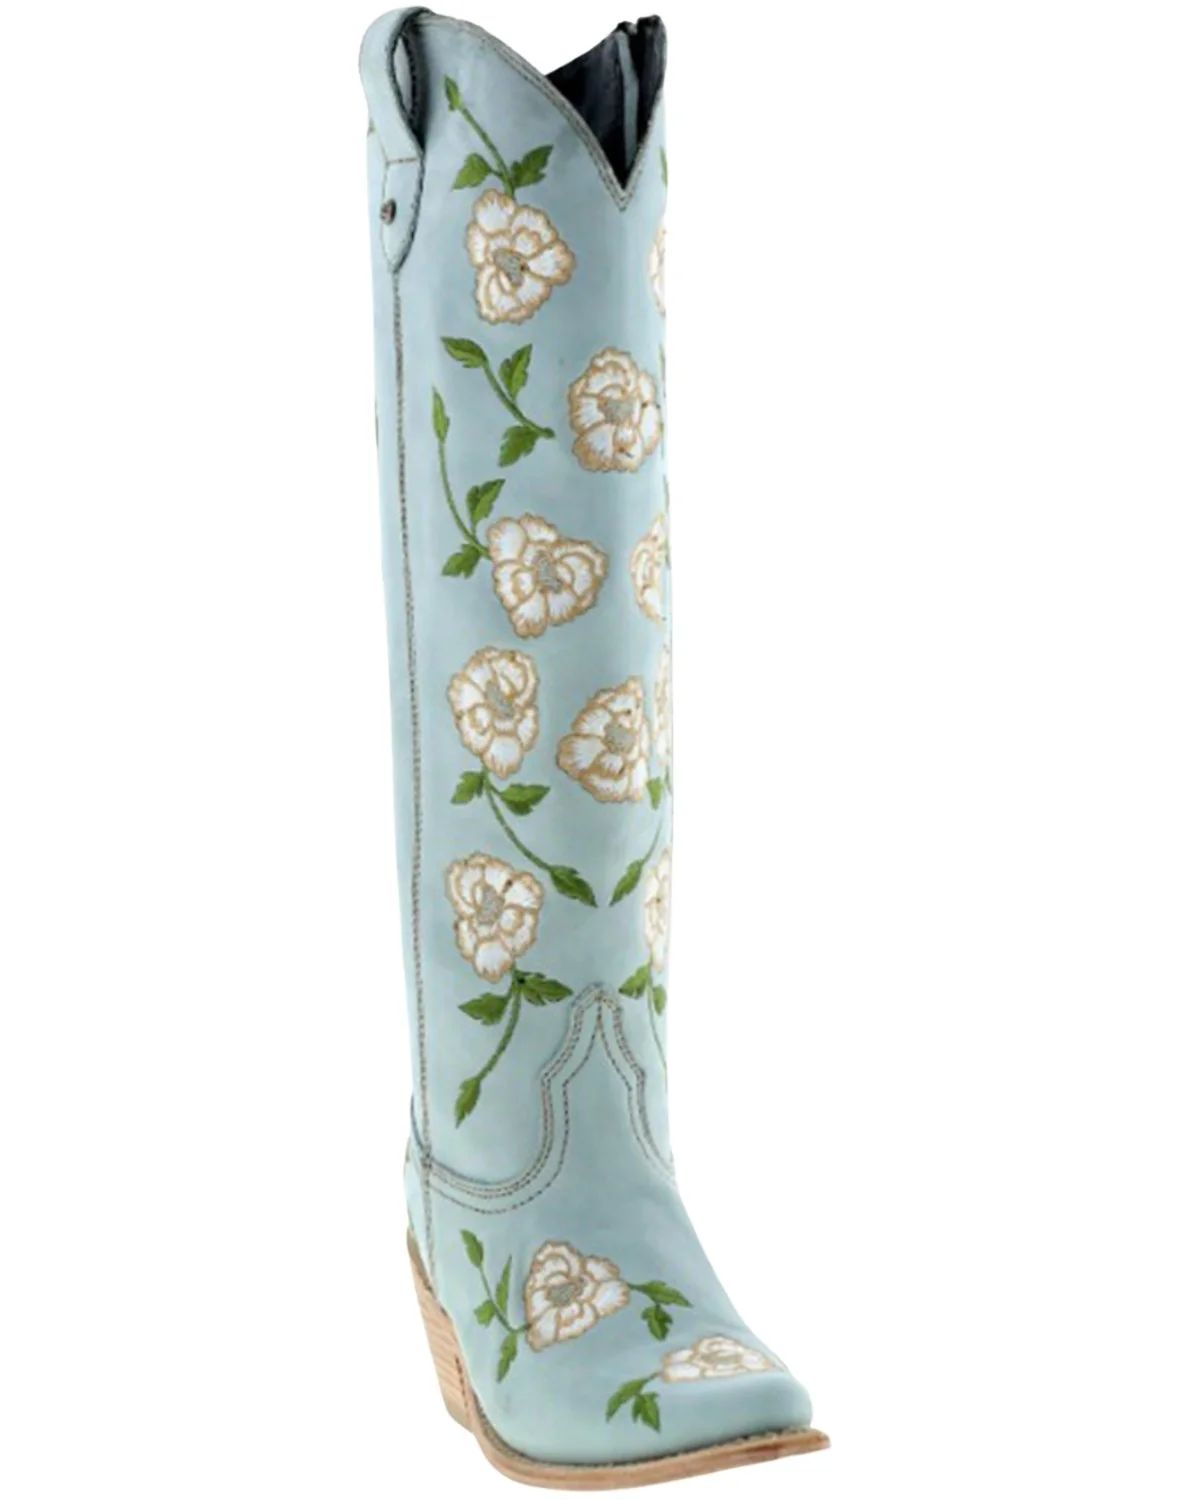 Liberty Black Women's Botas Caborca For Embroidered Roses Tall Western Boot Snip Light Blue 8 M  ... | Walmart (US)